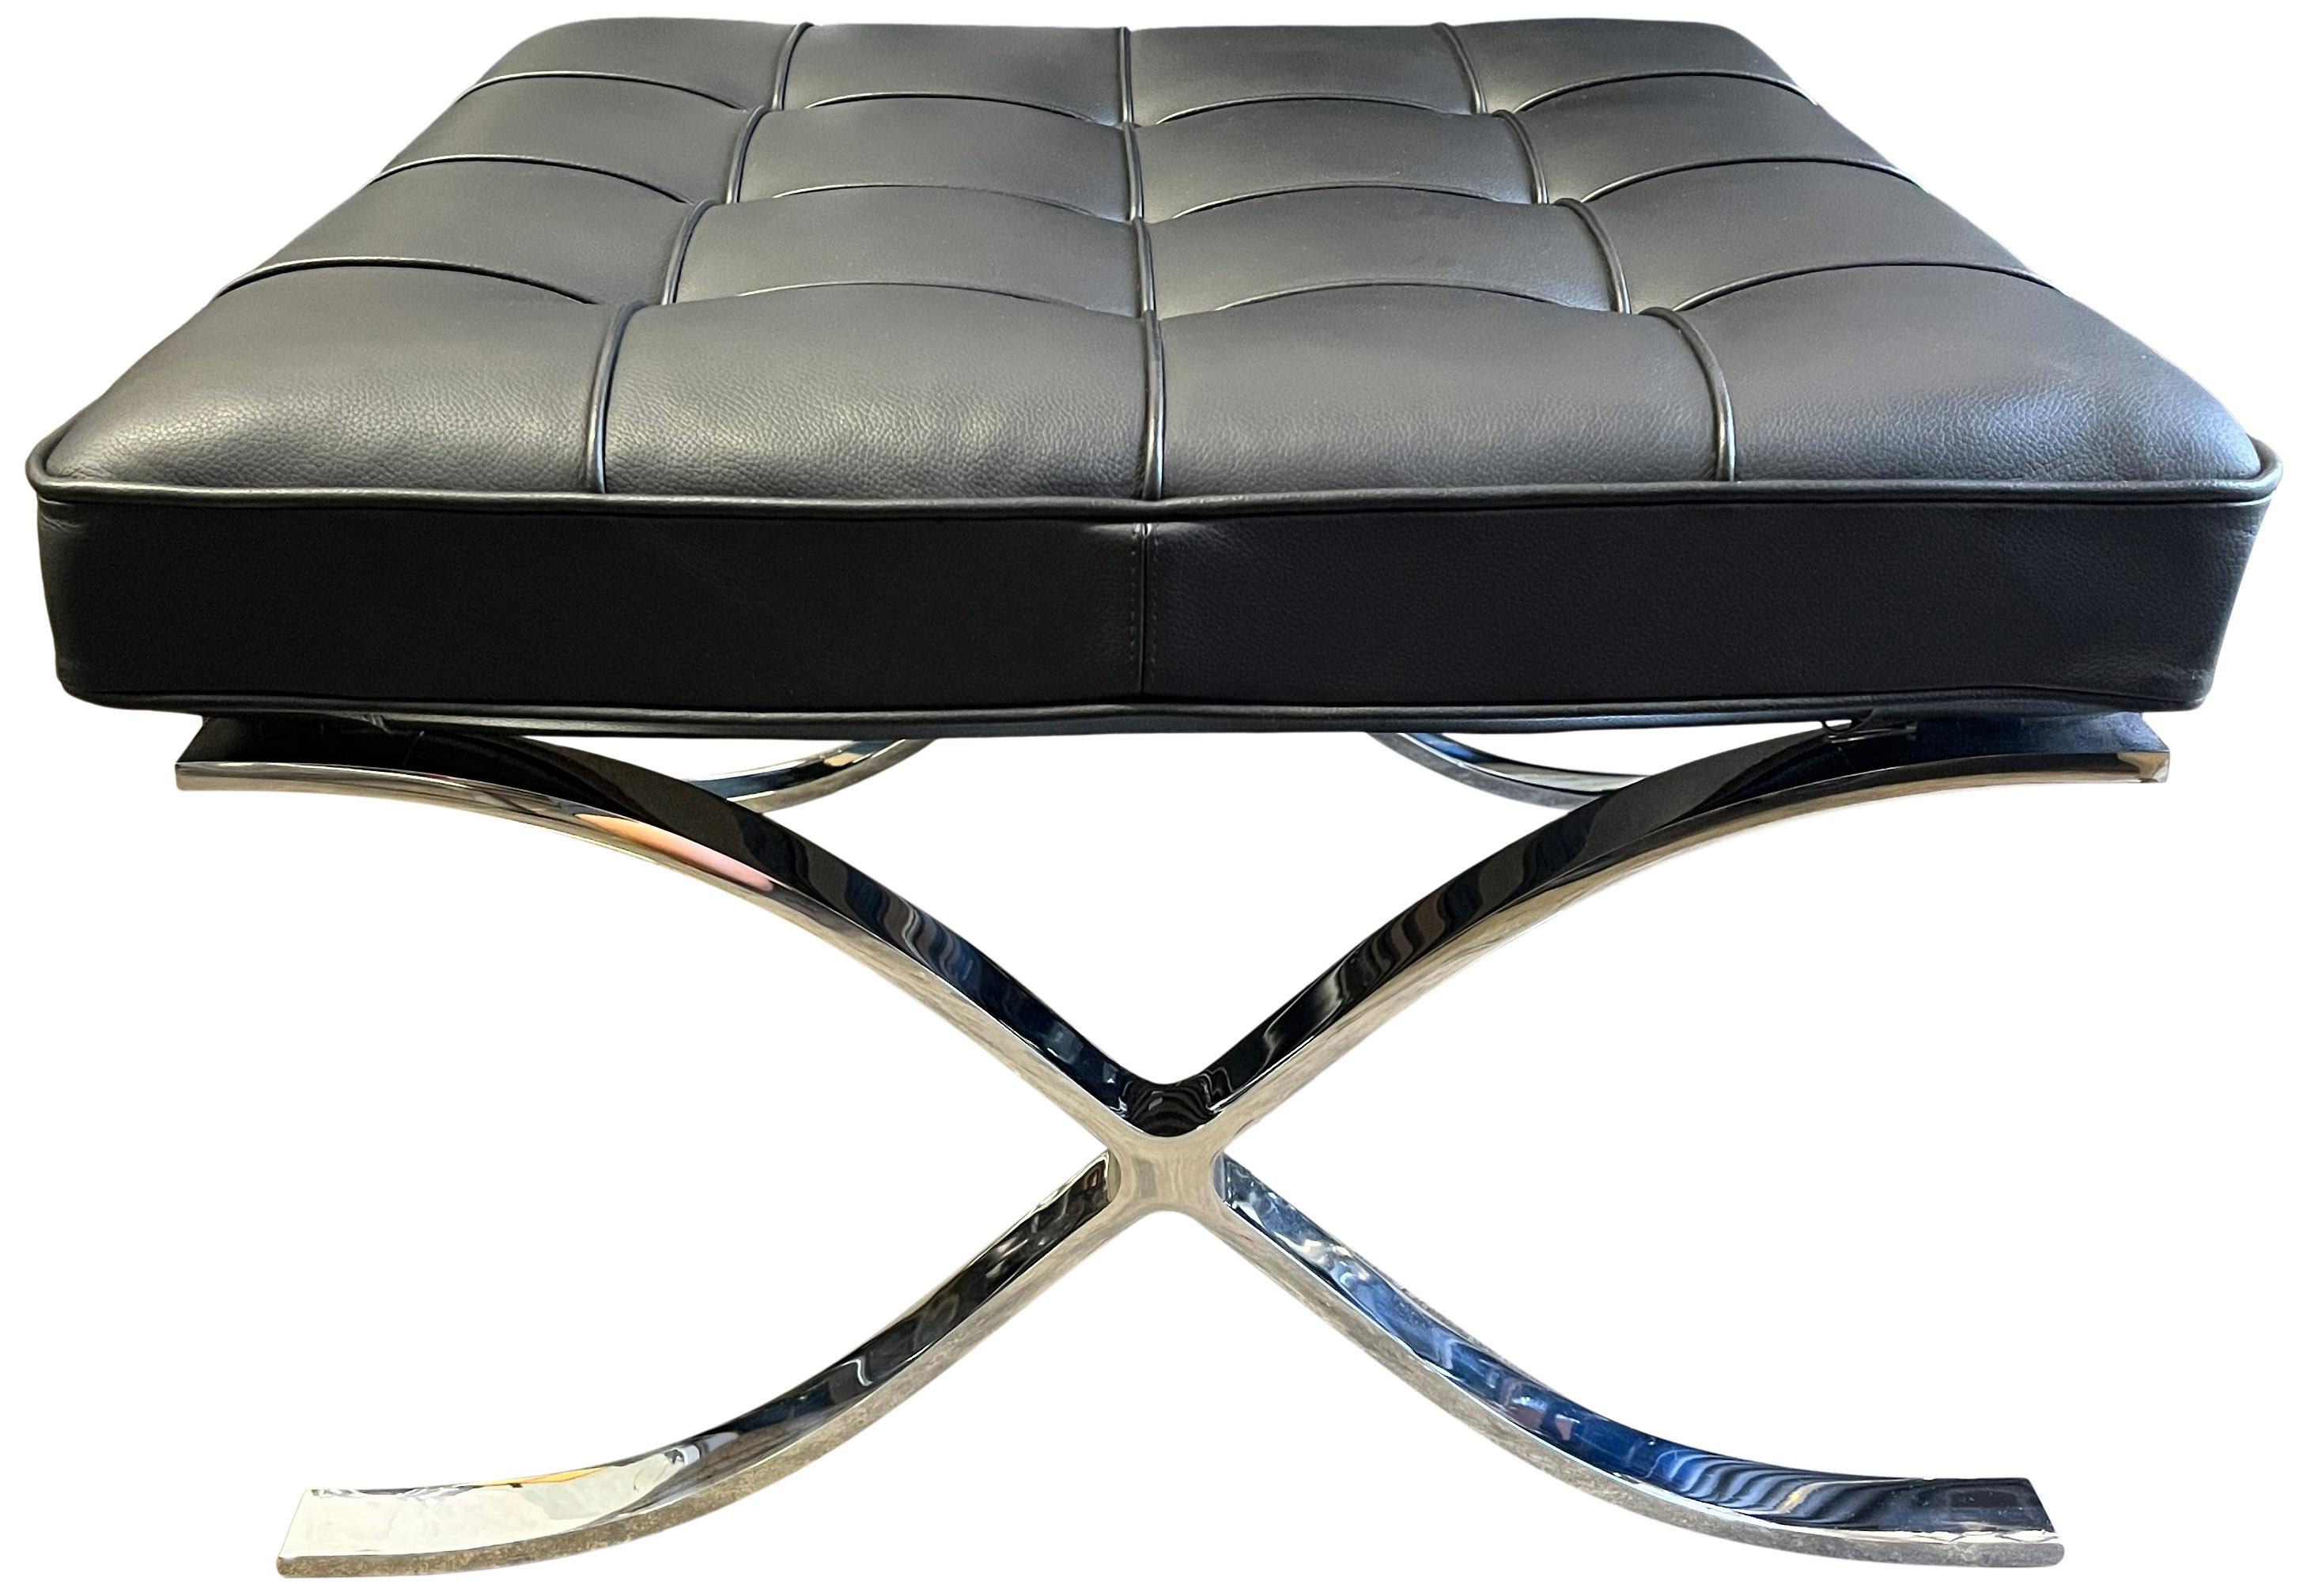 Midcentury Barcelona Ottomans / Stools in Black Leather for Knoll
